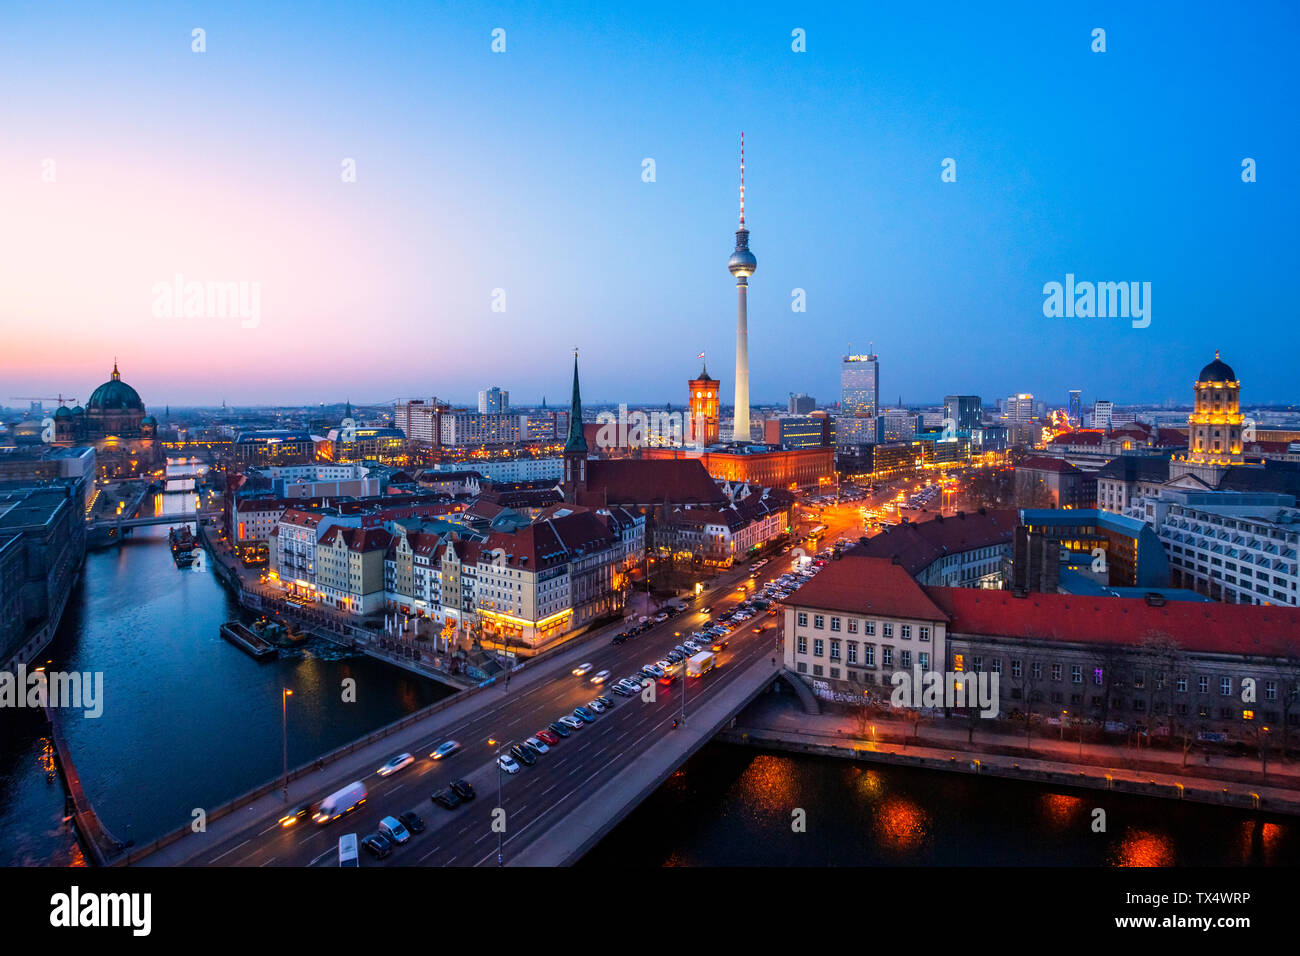 Germany, Berlin, panoramic view with television tower, Red City Hall and St. Nicholas church at sunset Stock Photo